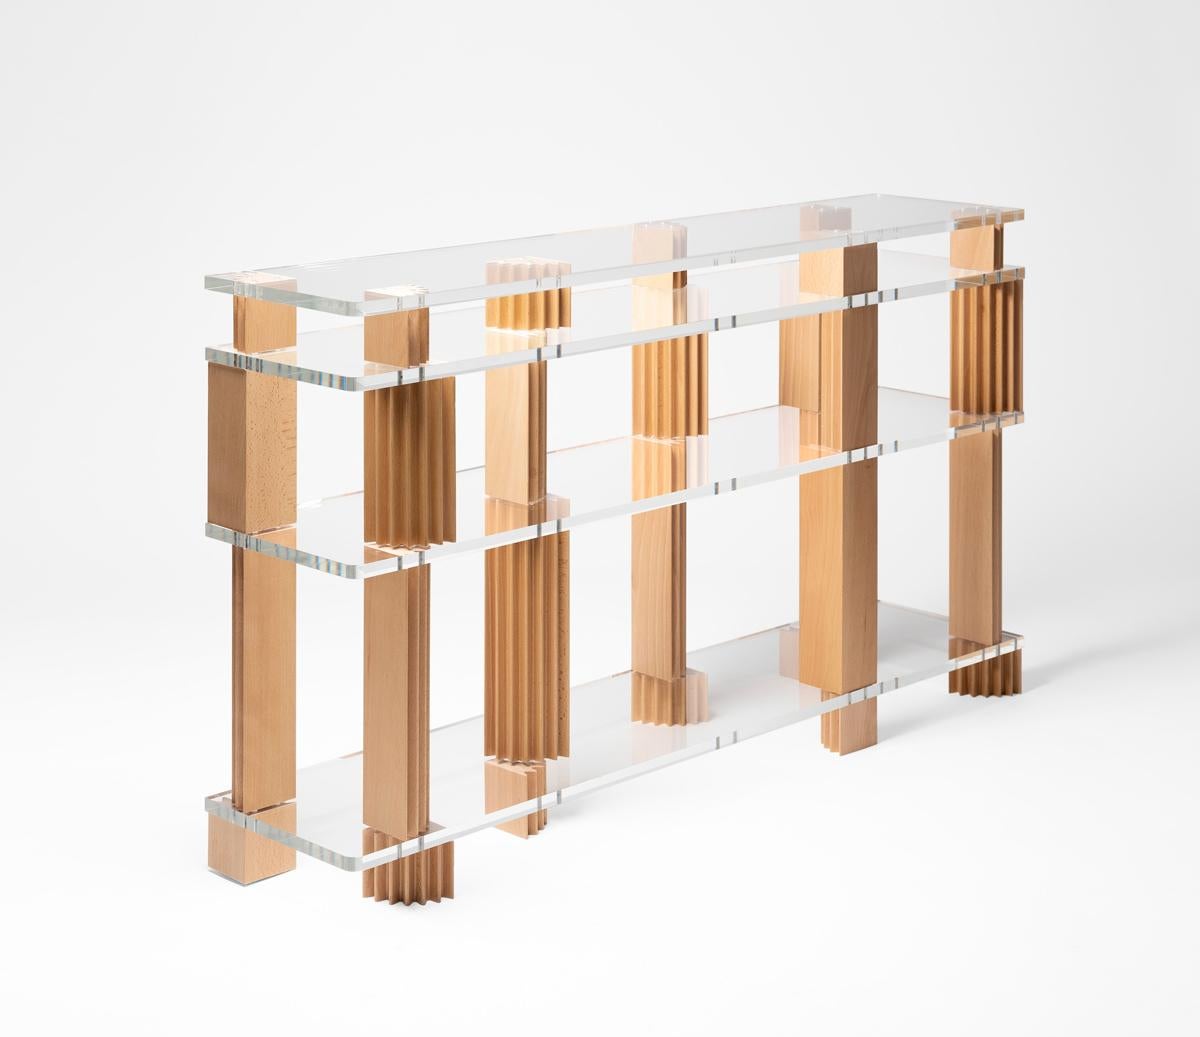 REmix vol 5. bookshelf, Limited Edition by Belén Moneo
Limited to 3 Units
Dimensions: 150 x 37 x H 150 cm
Materials: Varnished beech wood columns. Transparent methacrylate shelves.

Moneo Brock presents a new edition to the REmix project (vol.5)